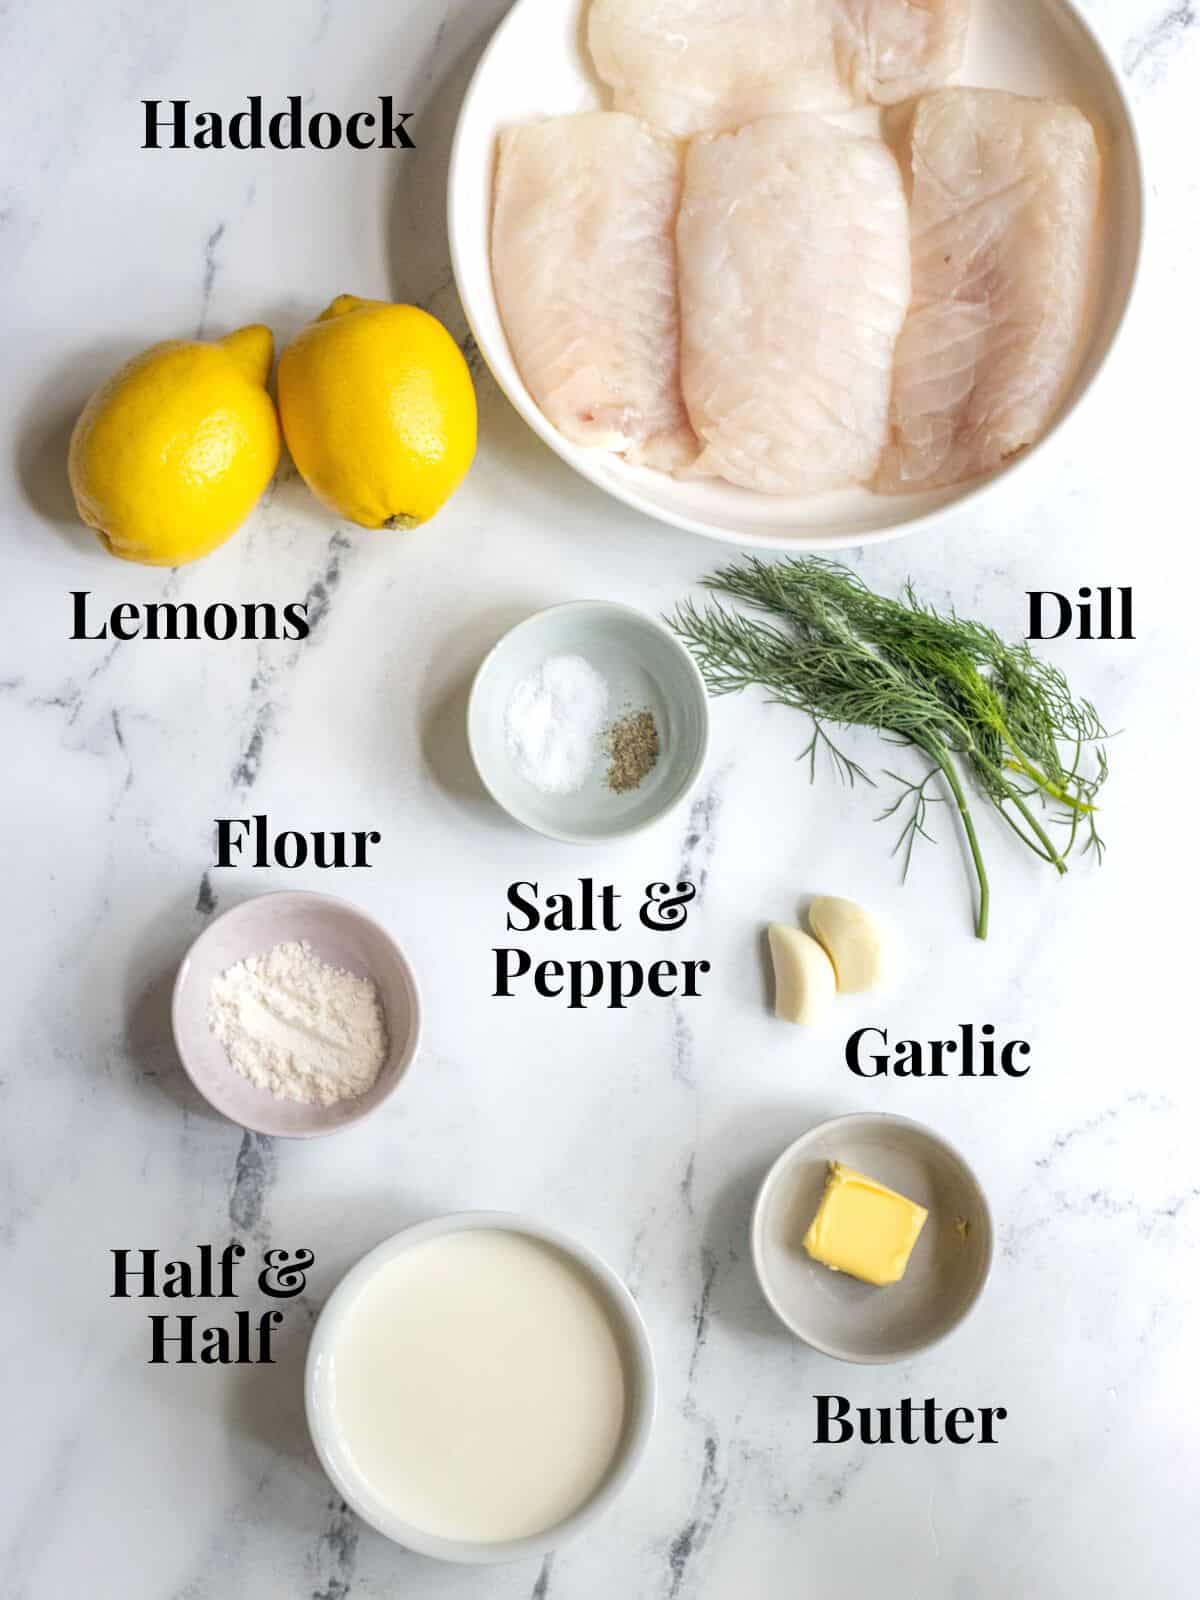 Ingredients for grilled haddock and creamy lemon dill sauce on a marble background with labels.